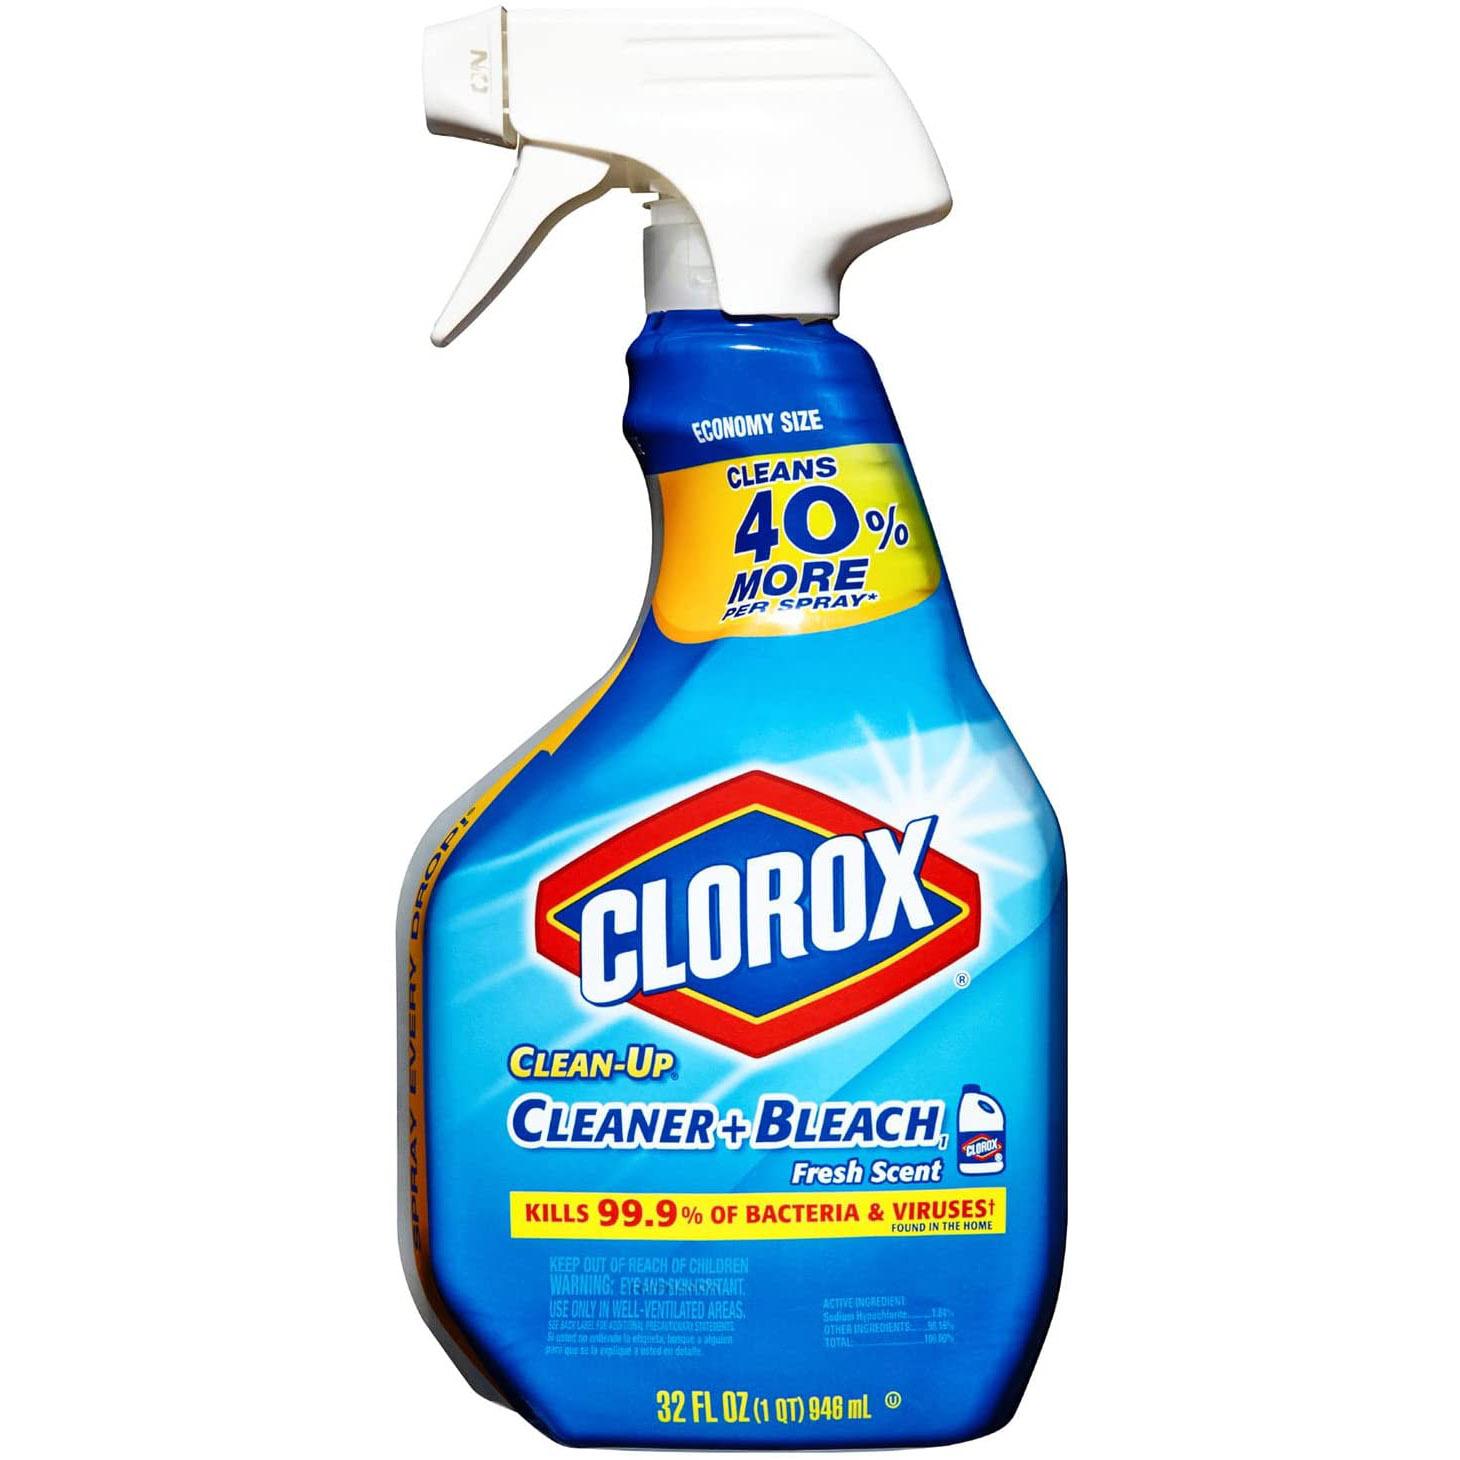 Clorox Clean-Up All Purpose Cleaner Spray Bottle with Bleach for $2.69 Shipped